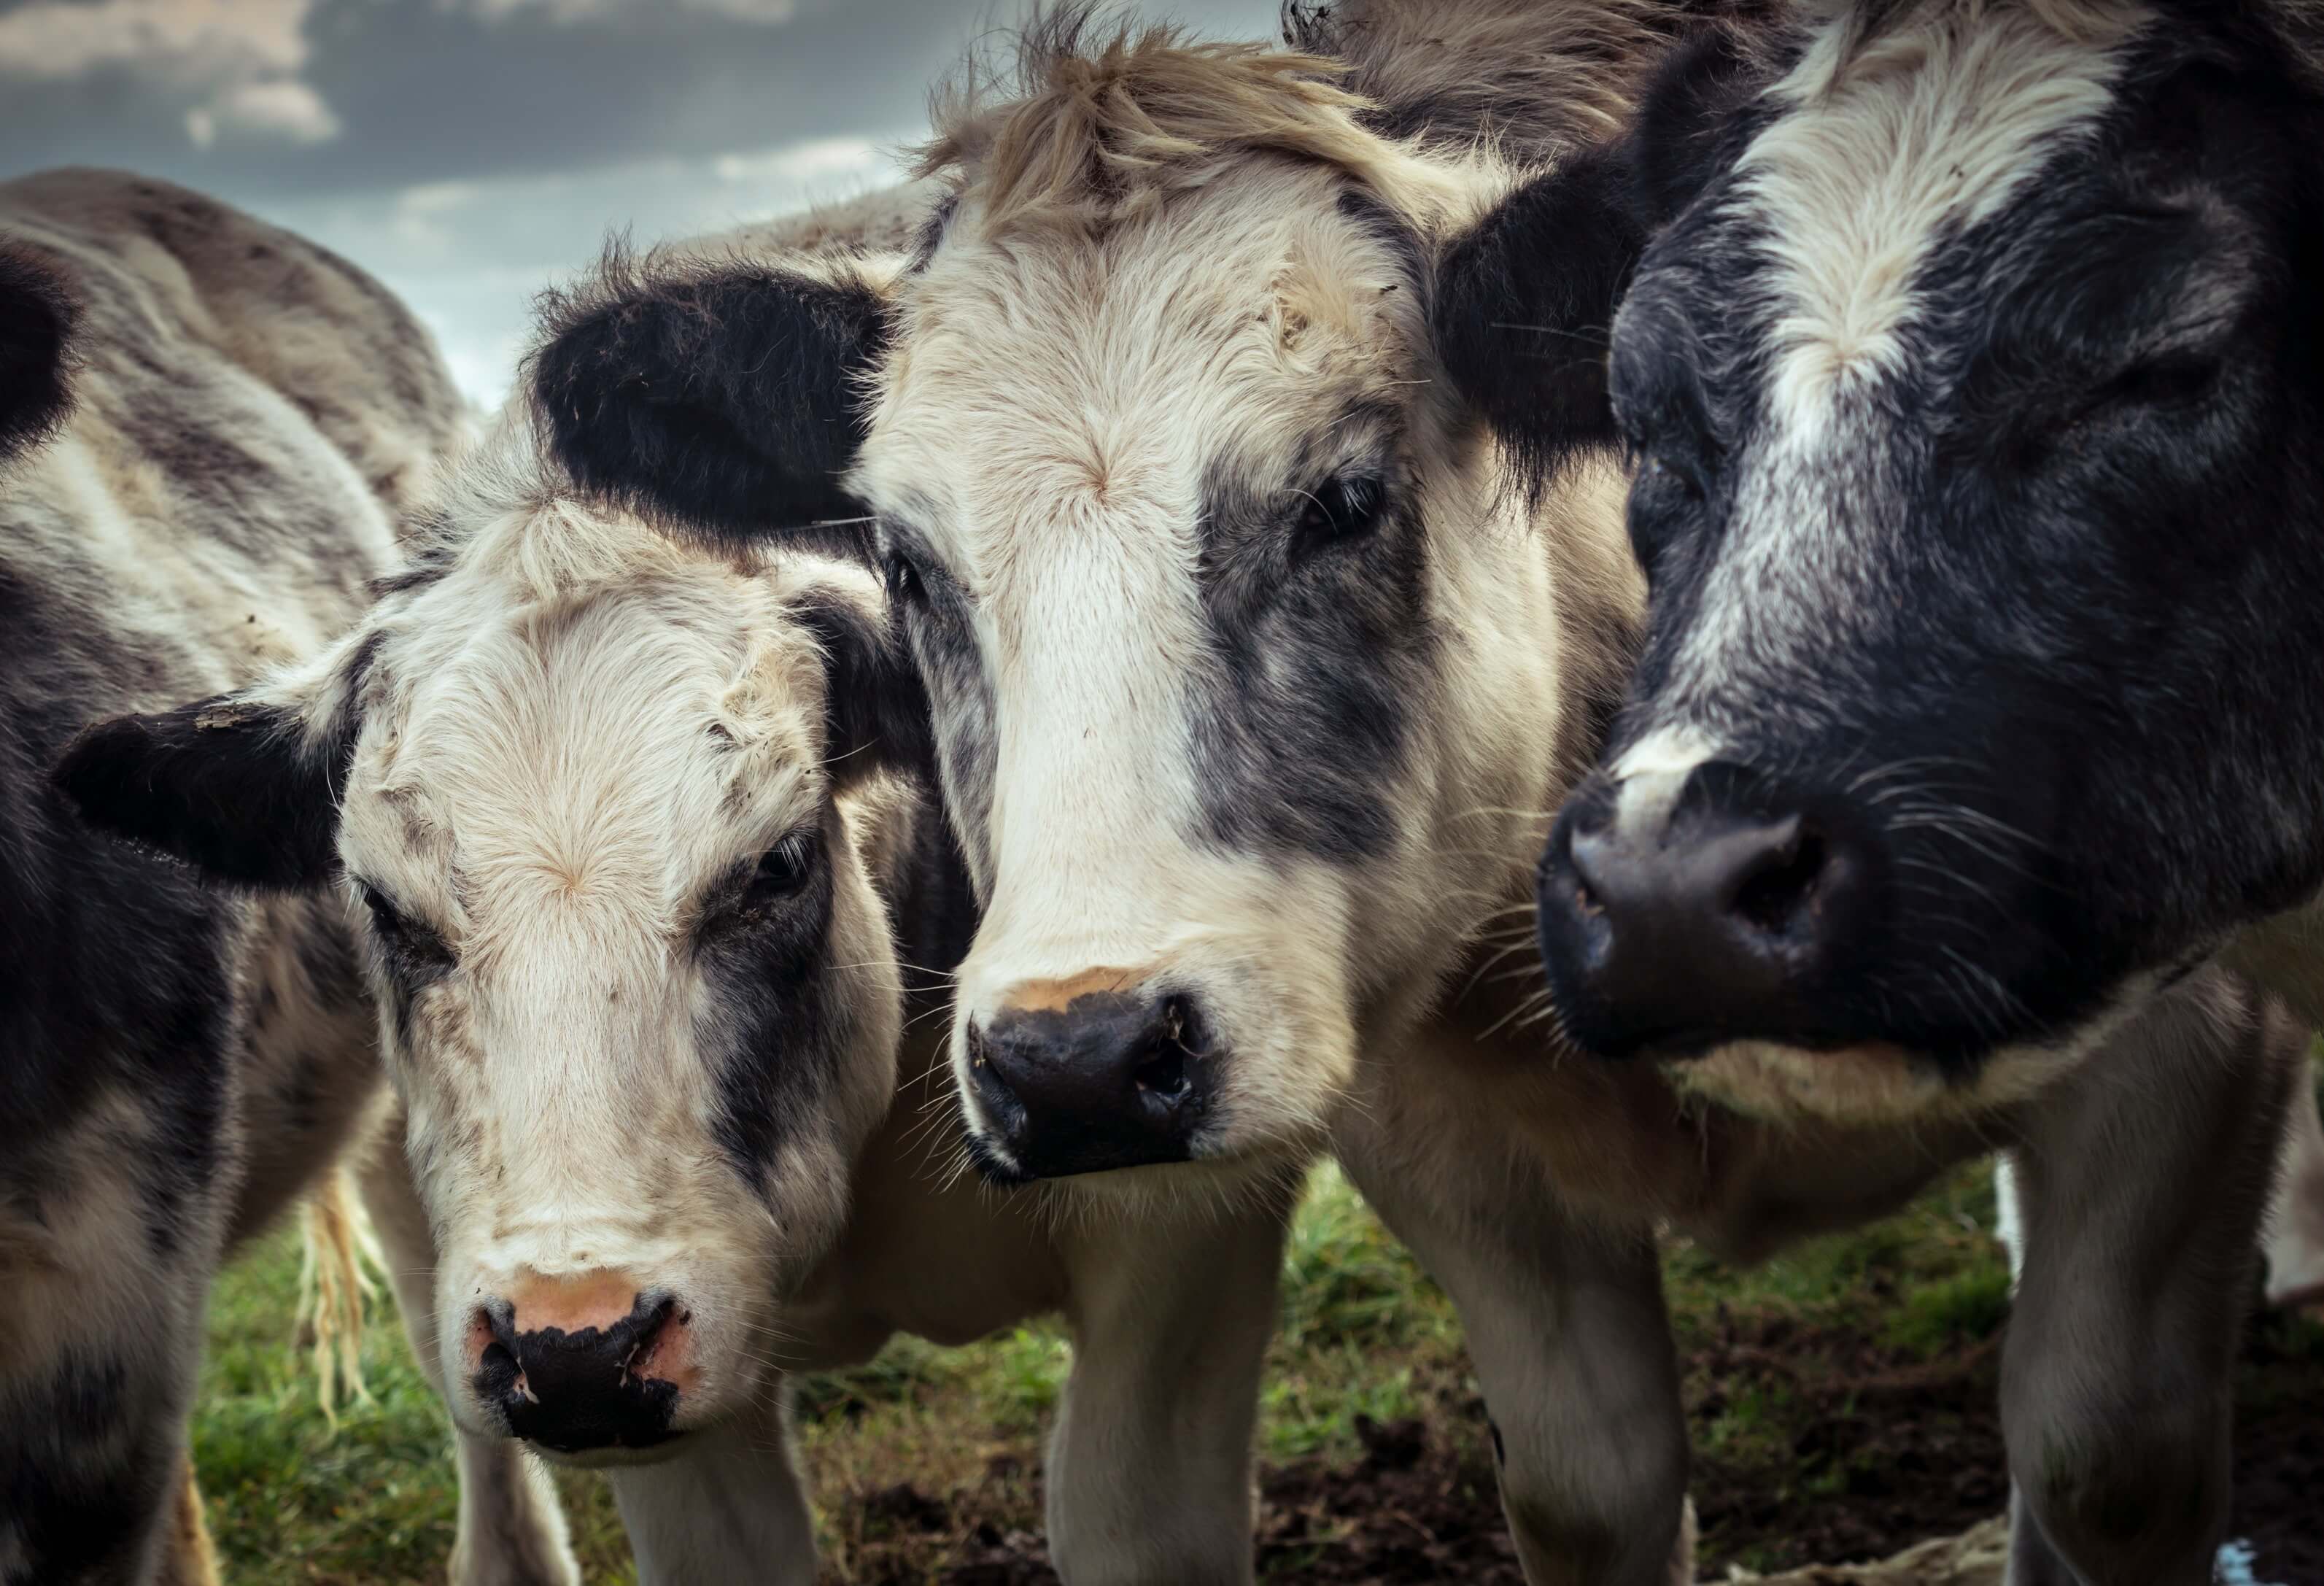 veg cute cow huddle nc pexels cmp ftc Ask Oatly to Join PETA in Urging Starbucks to Drop Its Unfair Vegan Milk Upcharge